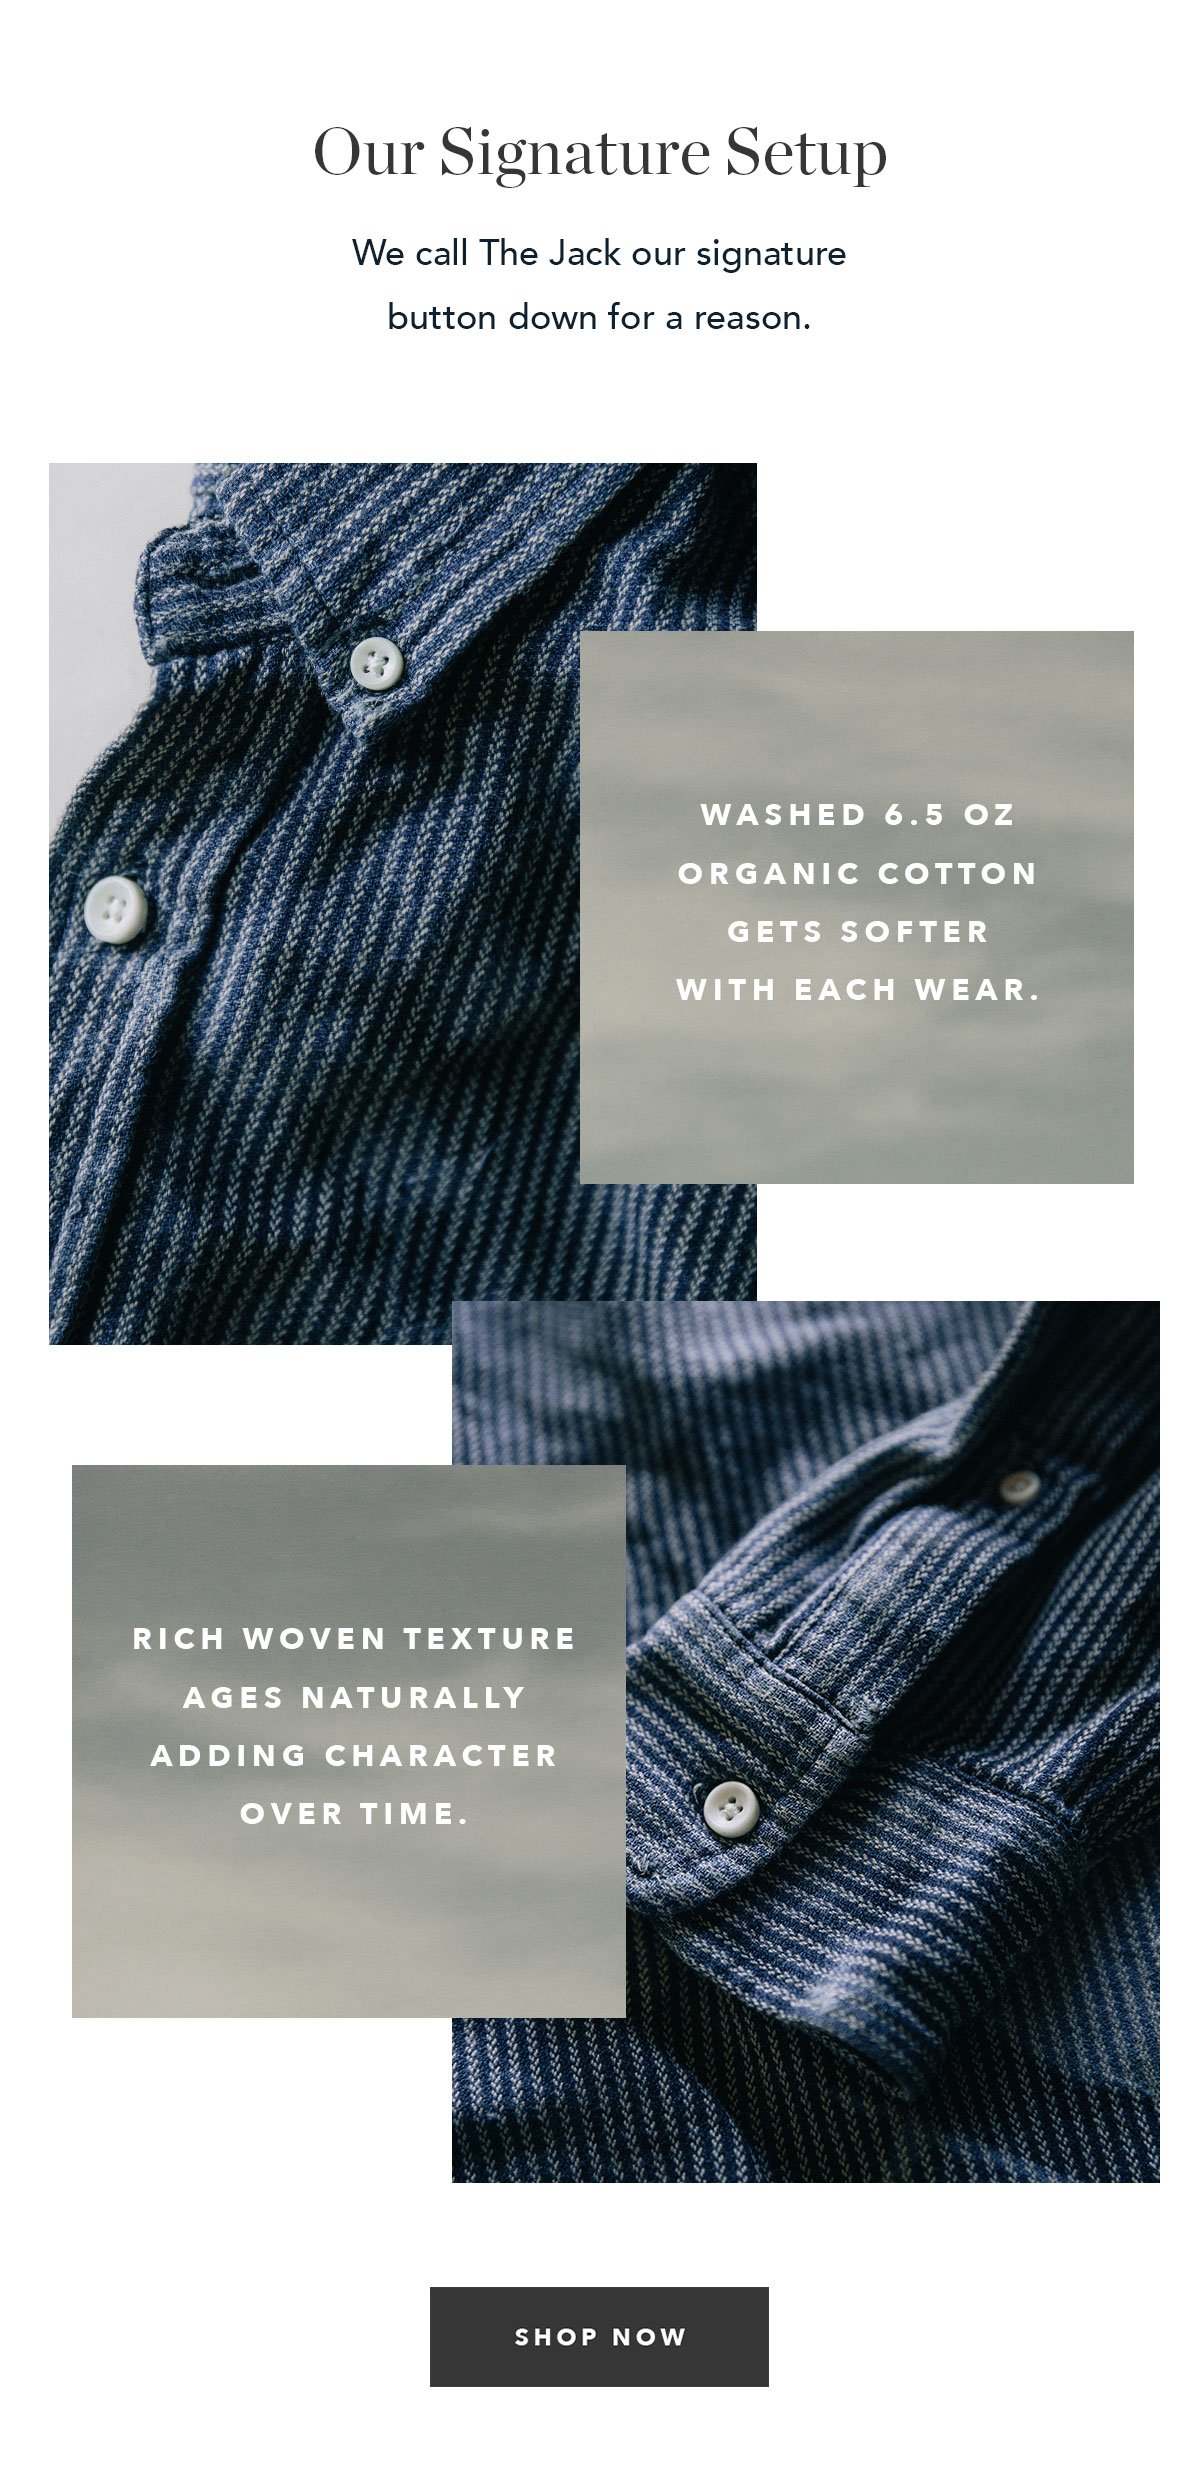 Our Signature Setup: Higher armholes prevent bunching, signature button-down collar, lock-stitched natural buttons 100% organic cotton